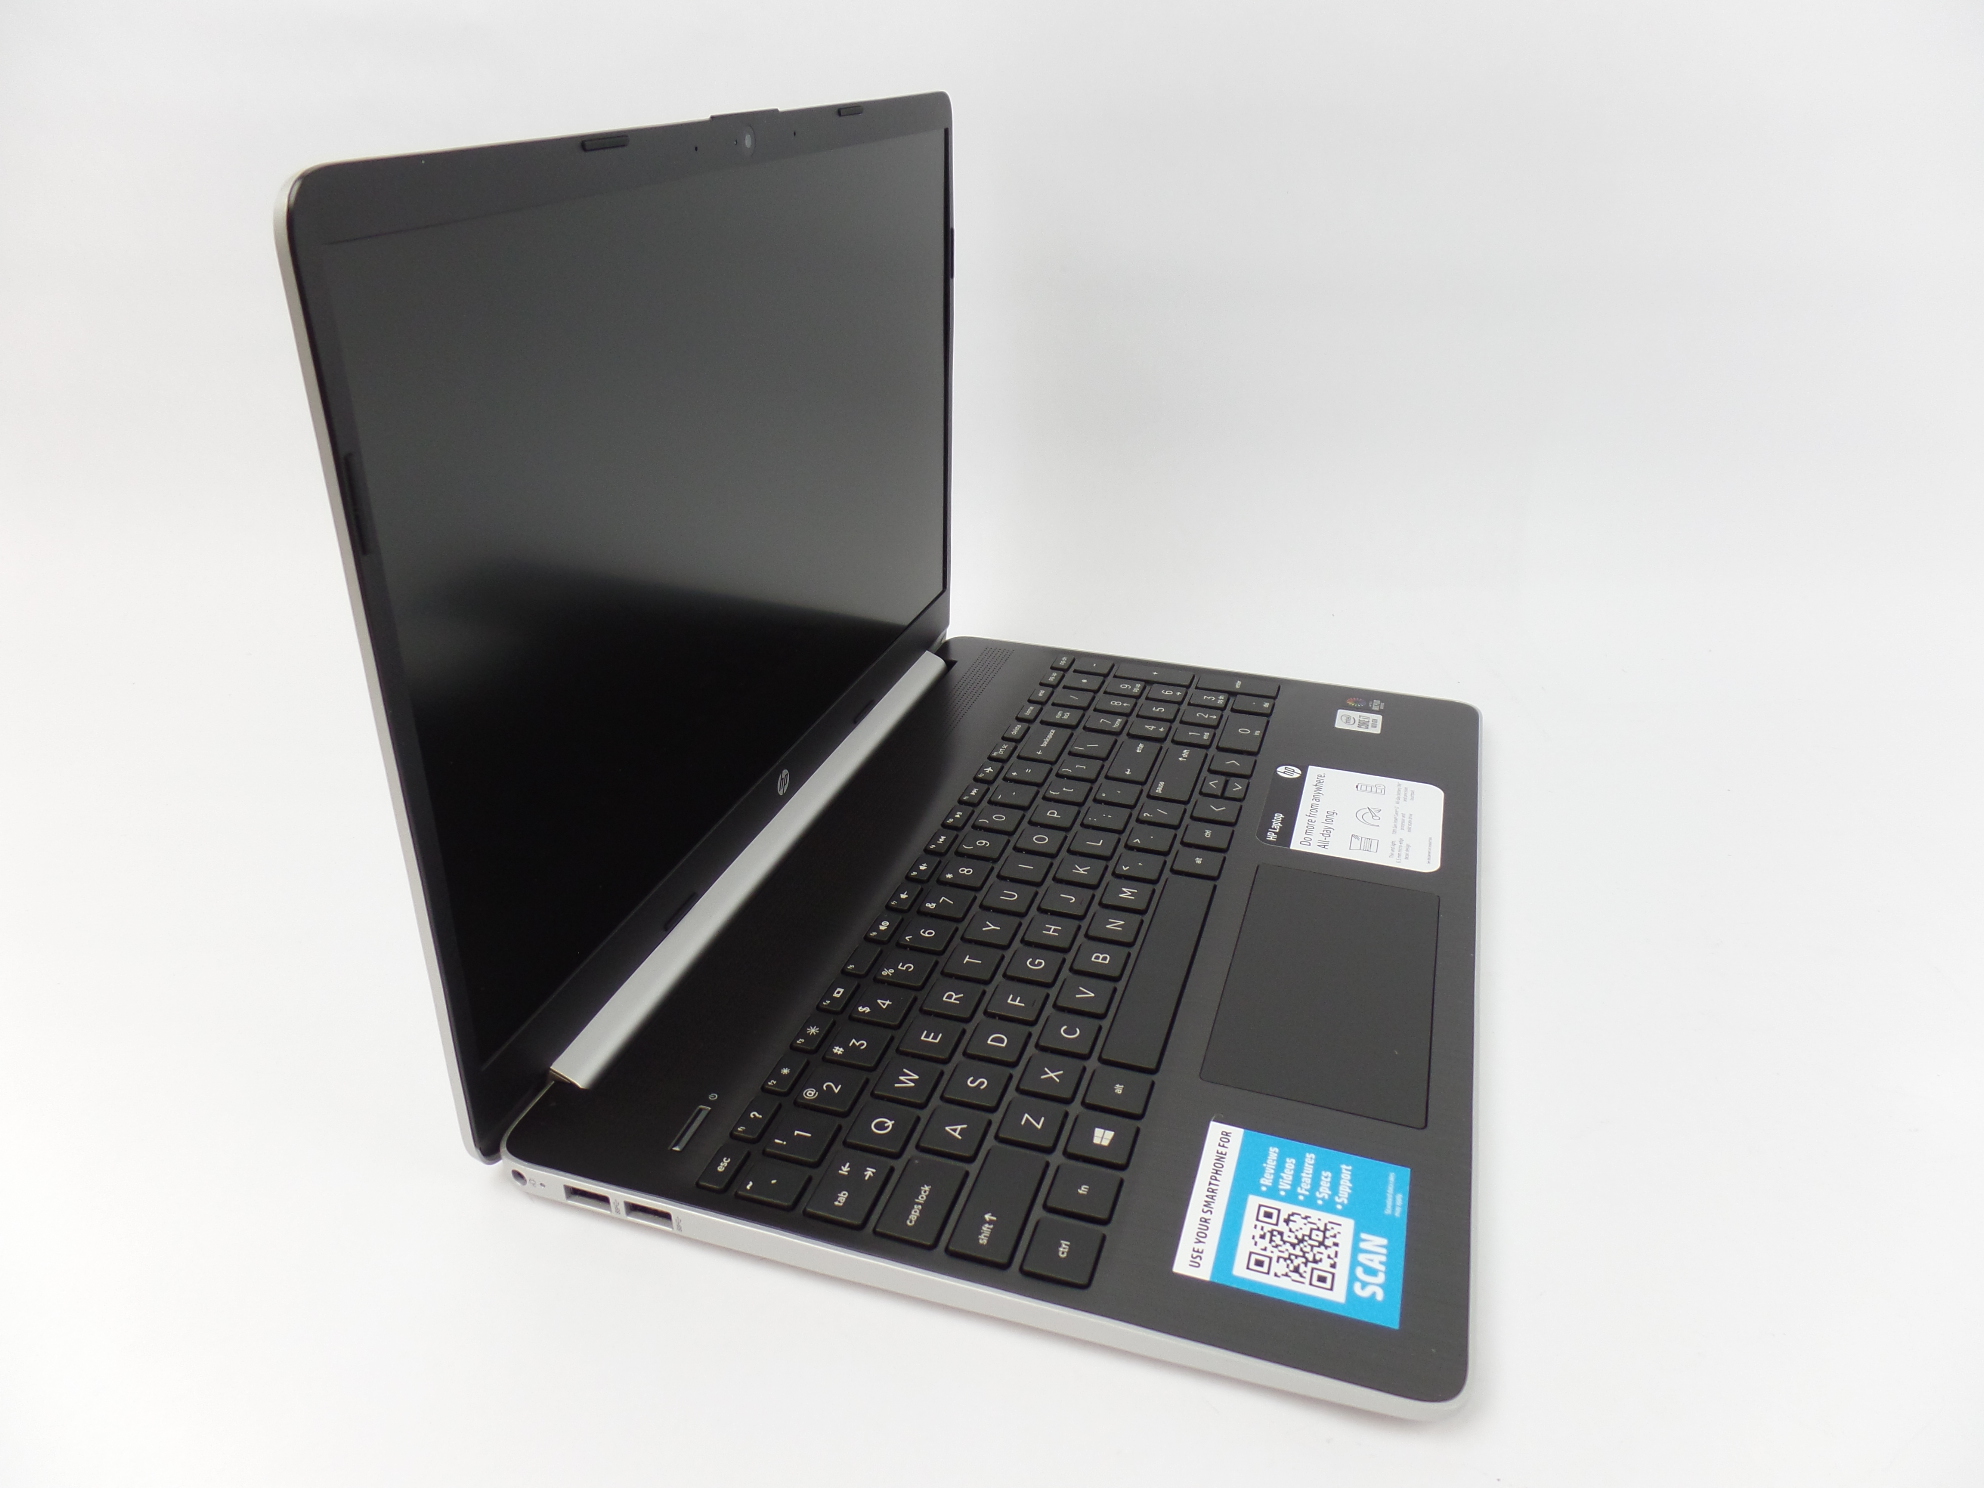 Used (good working condition) HP 15-dy1078nr 15.6" HD i7-1065G7 1.3GHz 8GB 256GB SSD Iris Plus W10H Laptop SD - image 4 of 6